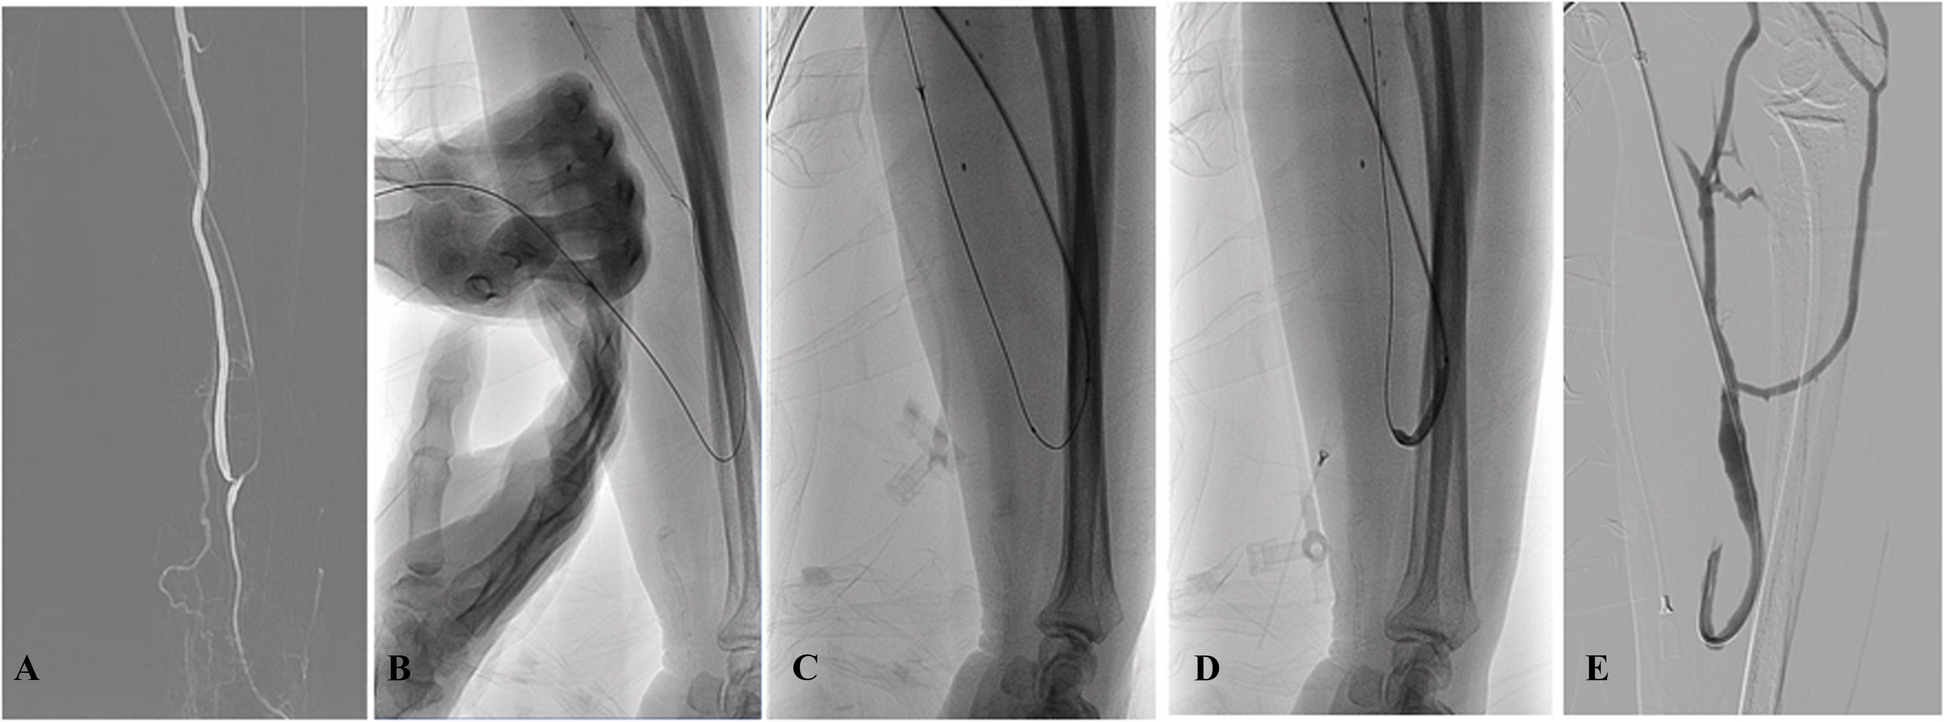 Pull-through technique through antegrade radial artery puncture without sheath insertion in balloon-assisted radiocephalic arteriovenous fistulas maturation